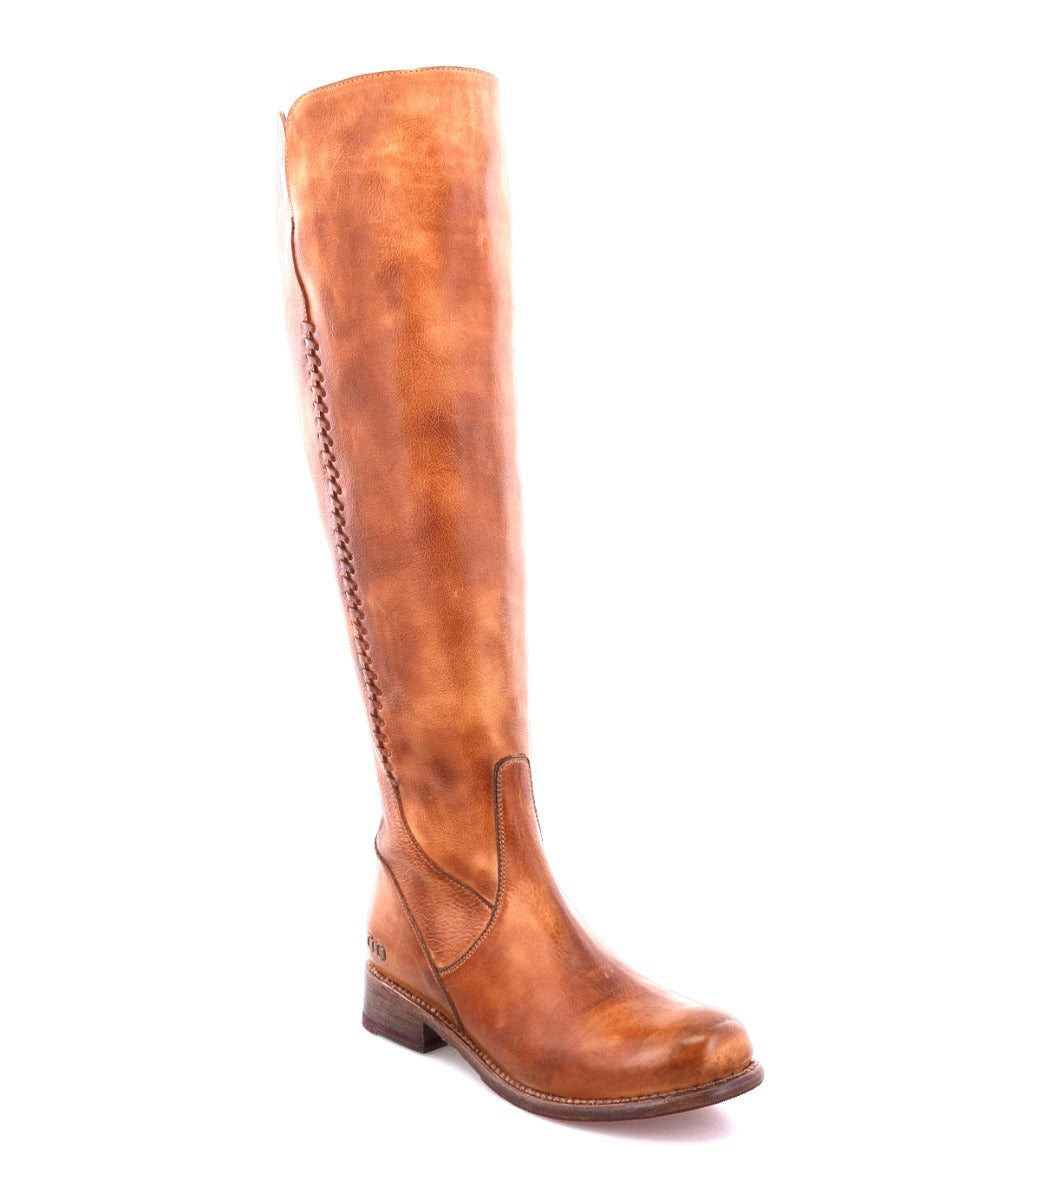 A women's Letizia tan leather boot with a zipper on the side, made by Bed Stu.